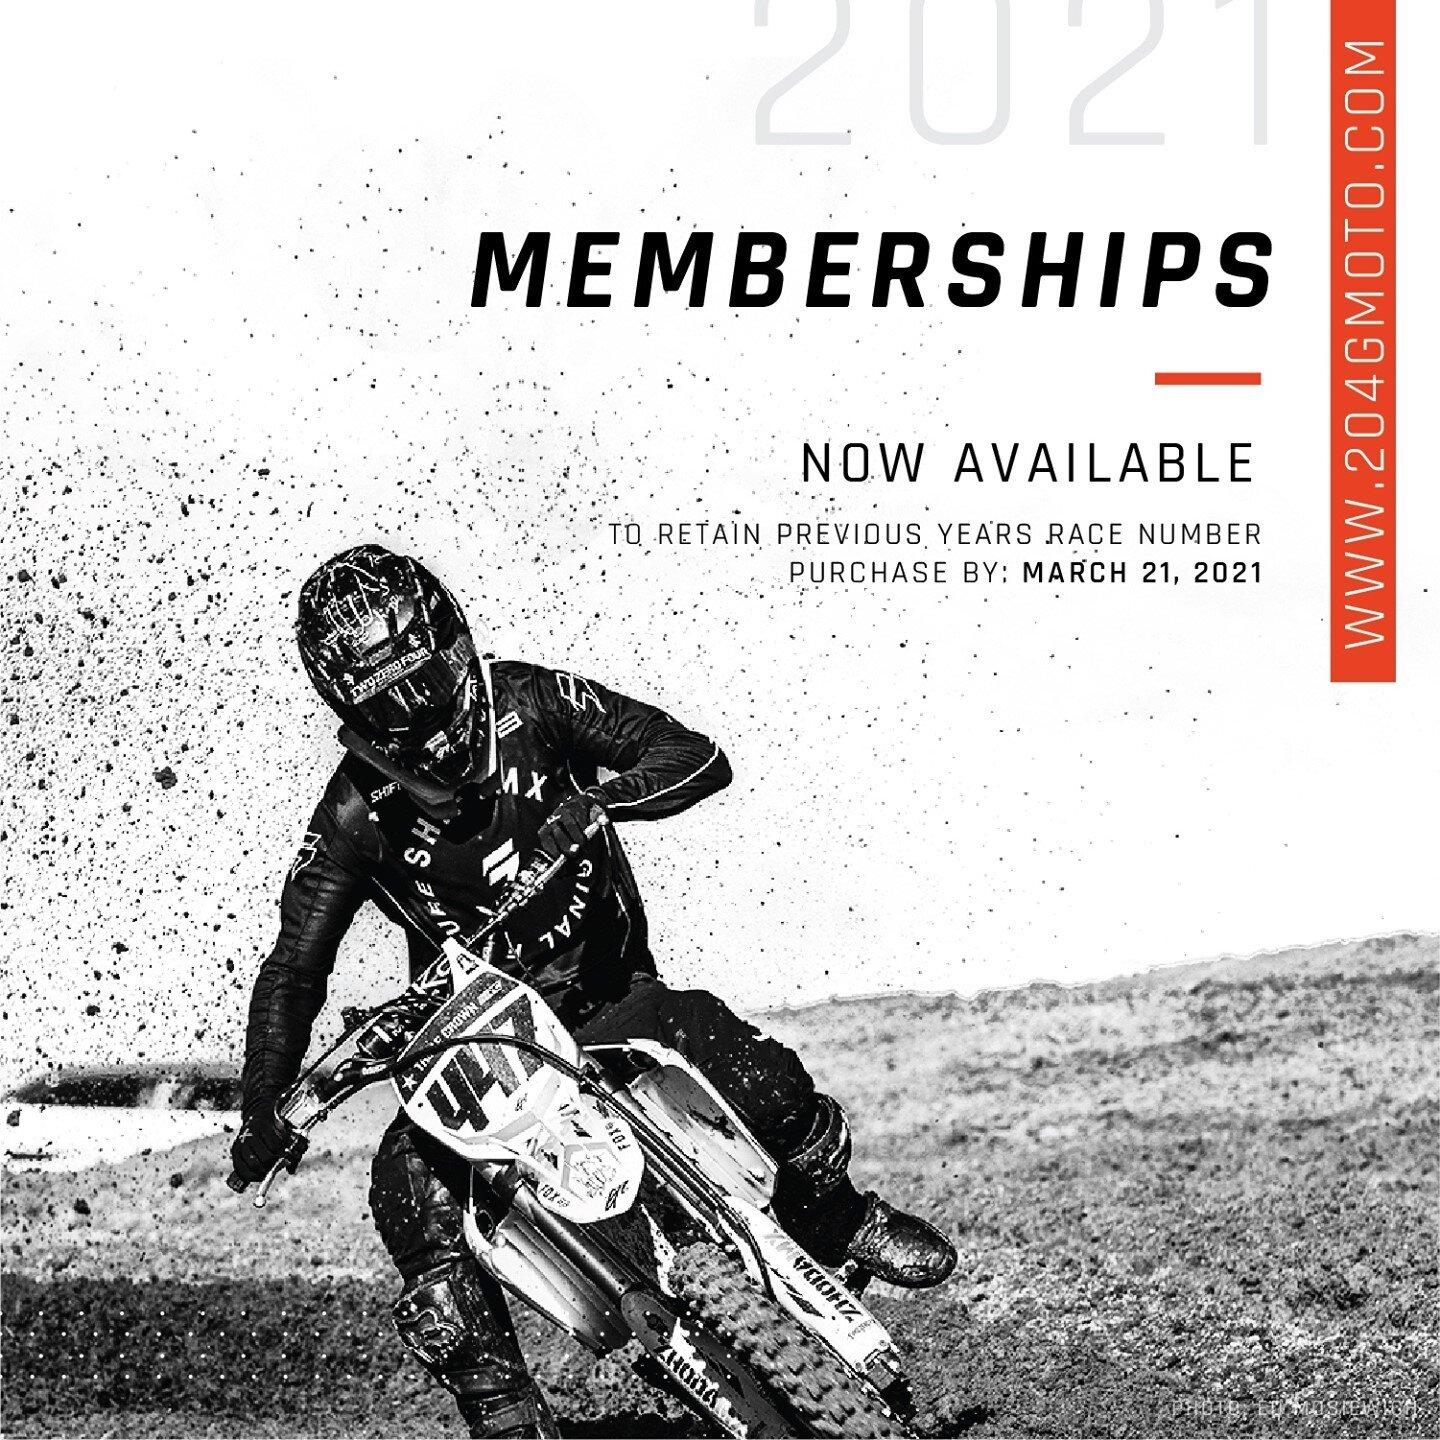 2021 Memberships now available, visit www.204gmoto.com to register and for more information on the upcoming race season!